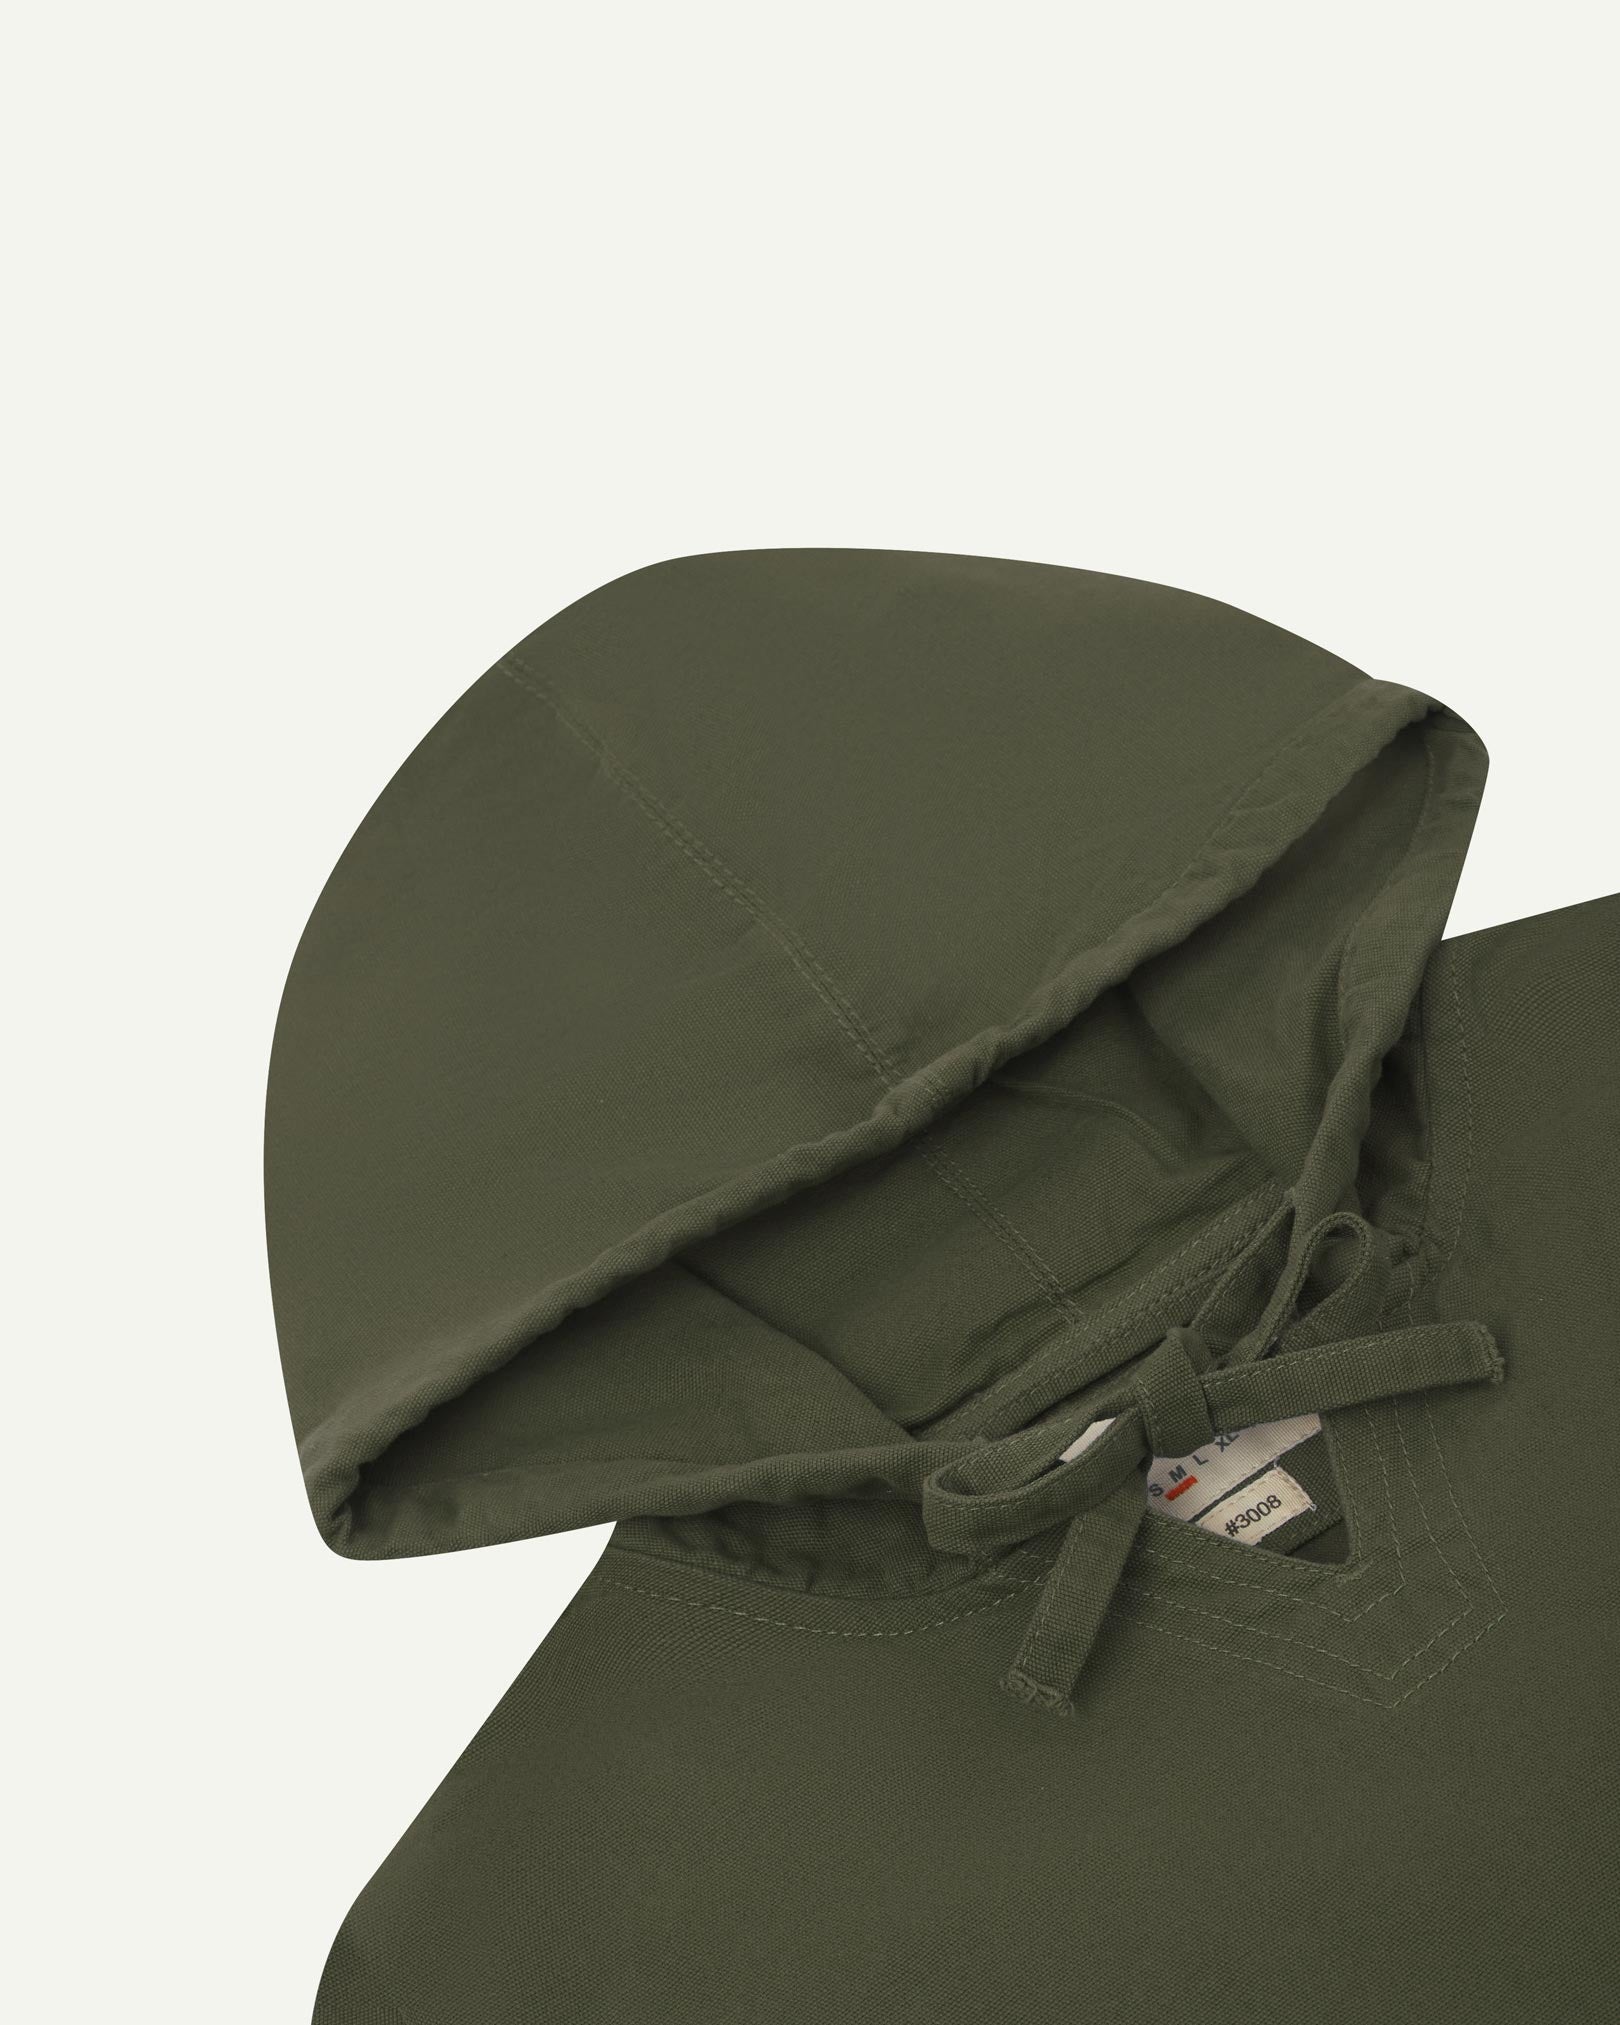 Closer look at the hood of the Uskees organic cotton smock in vine green showing hood, hood drawstring and quadruply stitched neck area.